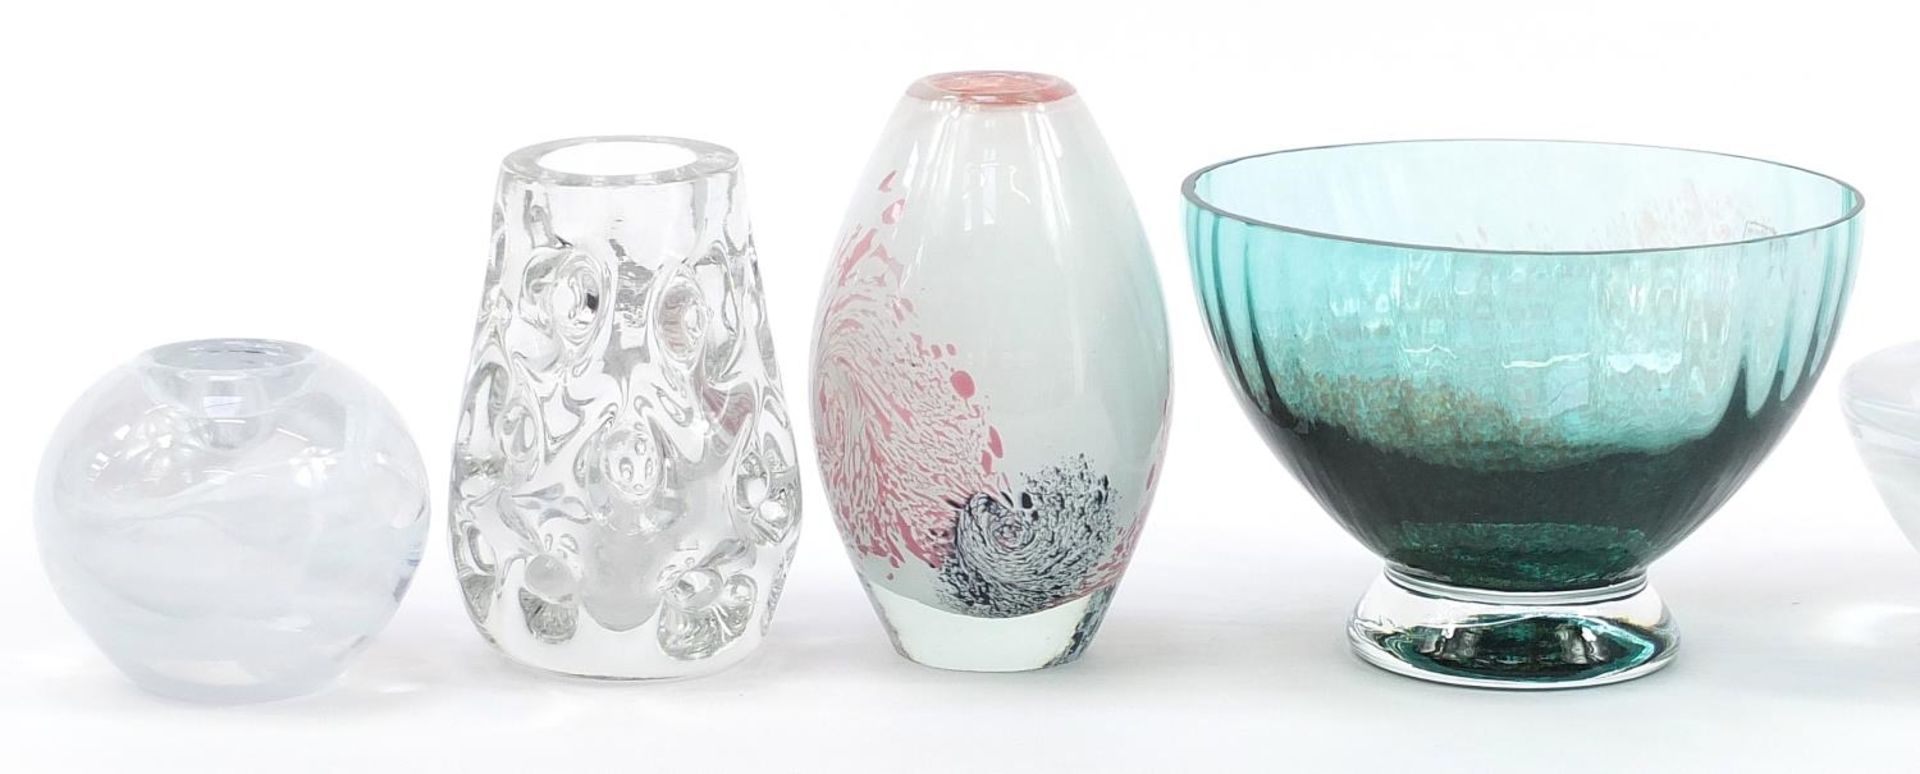 Art glassware including a pair of Kosta Boda candleholders, Mdina vase and large Caithness bowl, the - Image 2 of 7